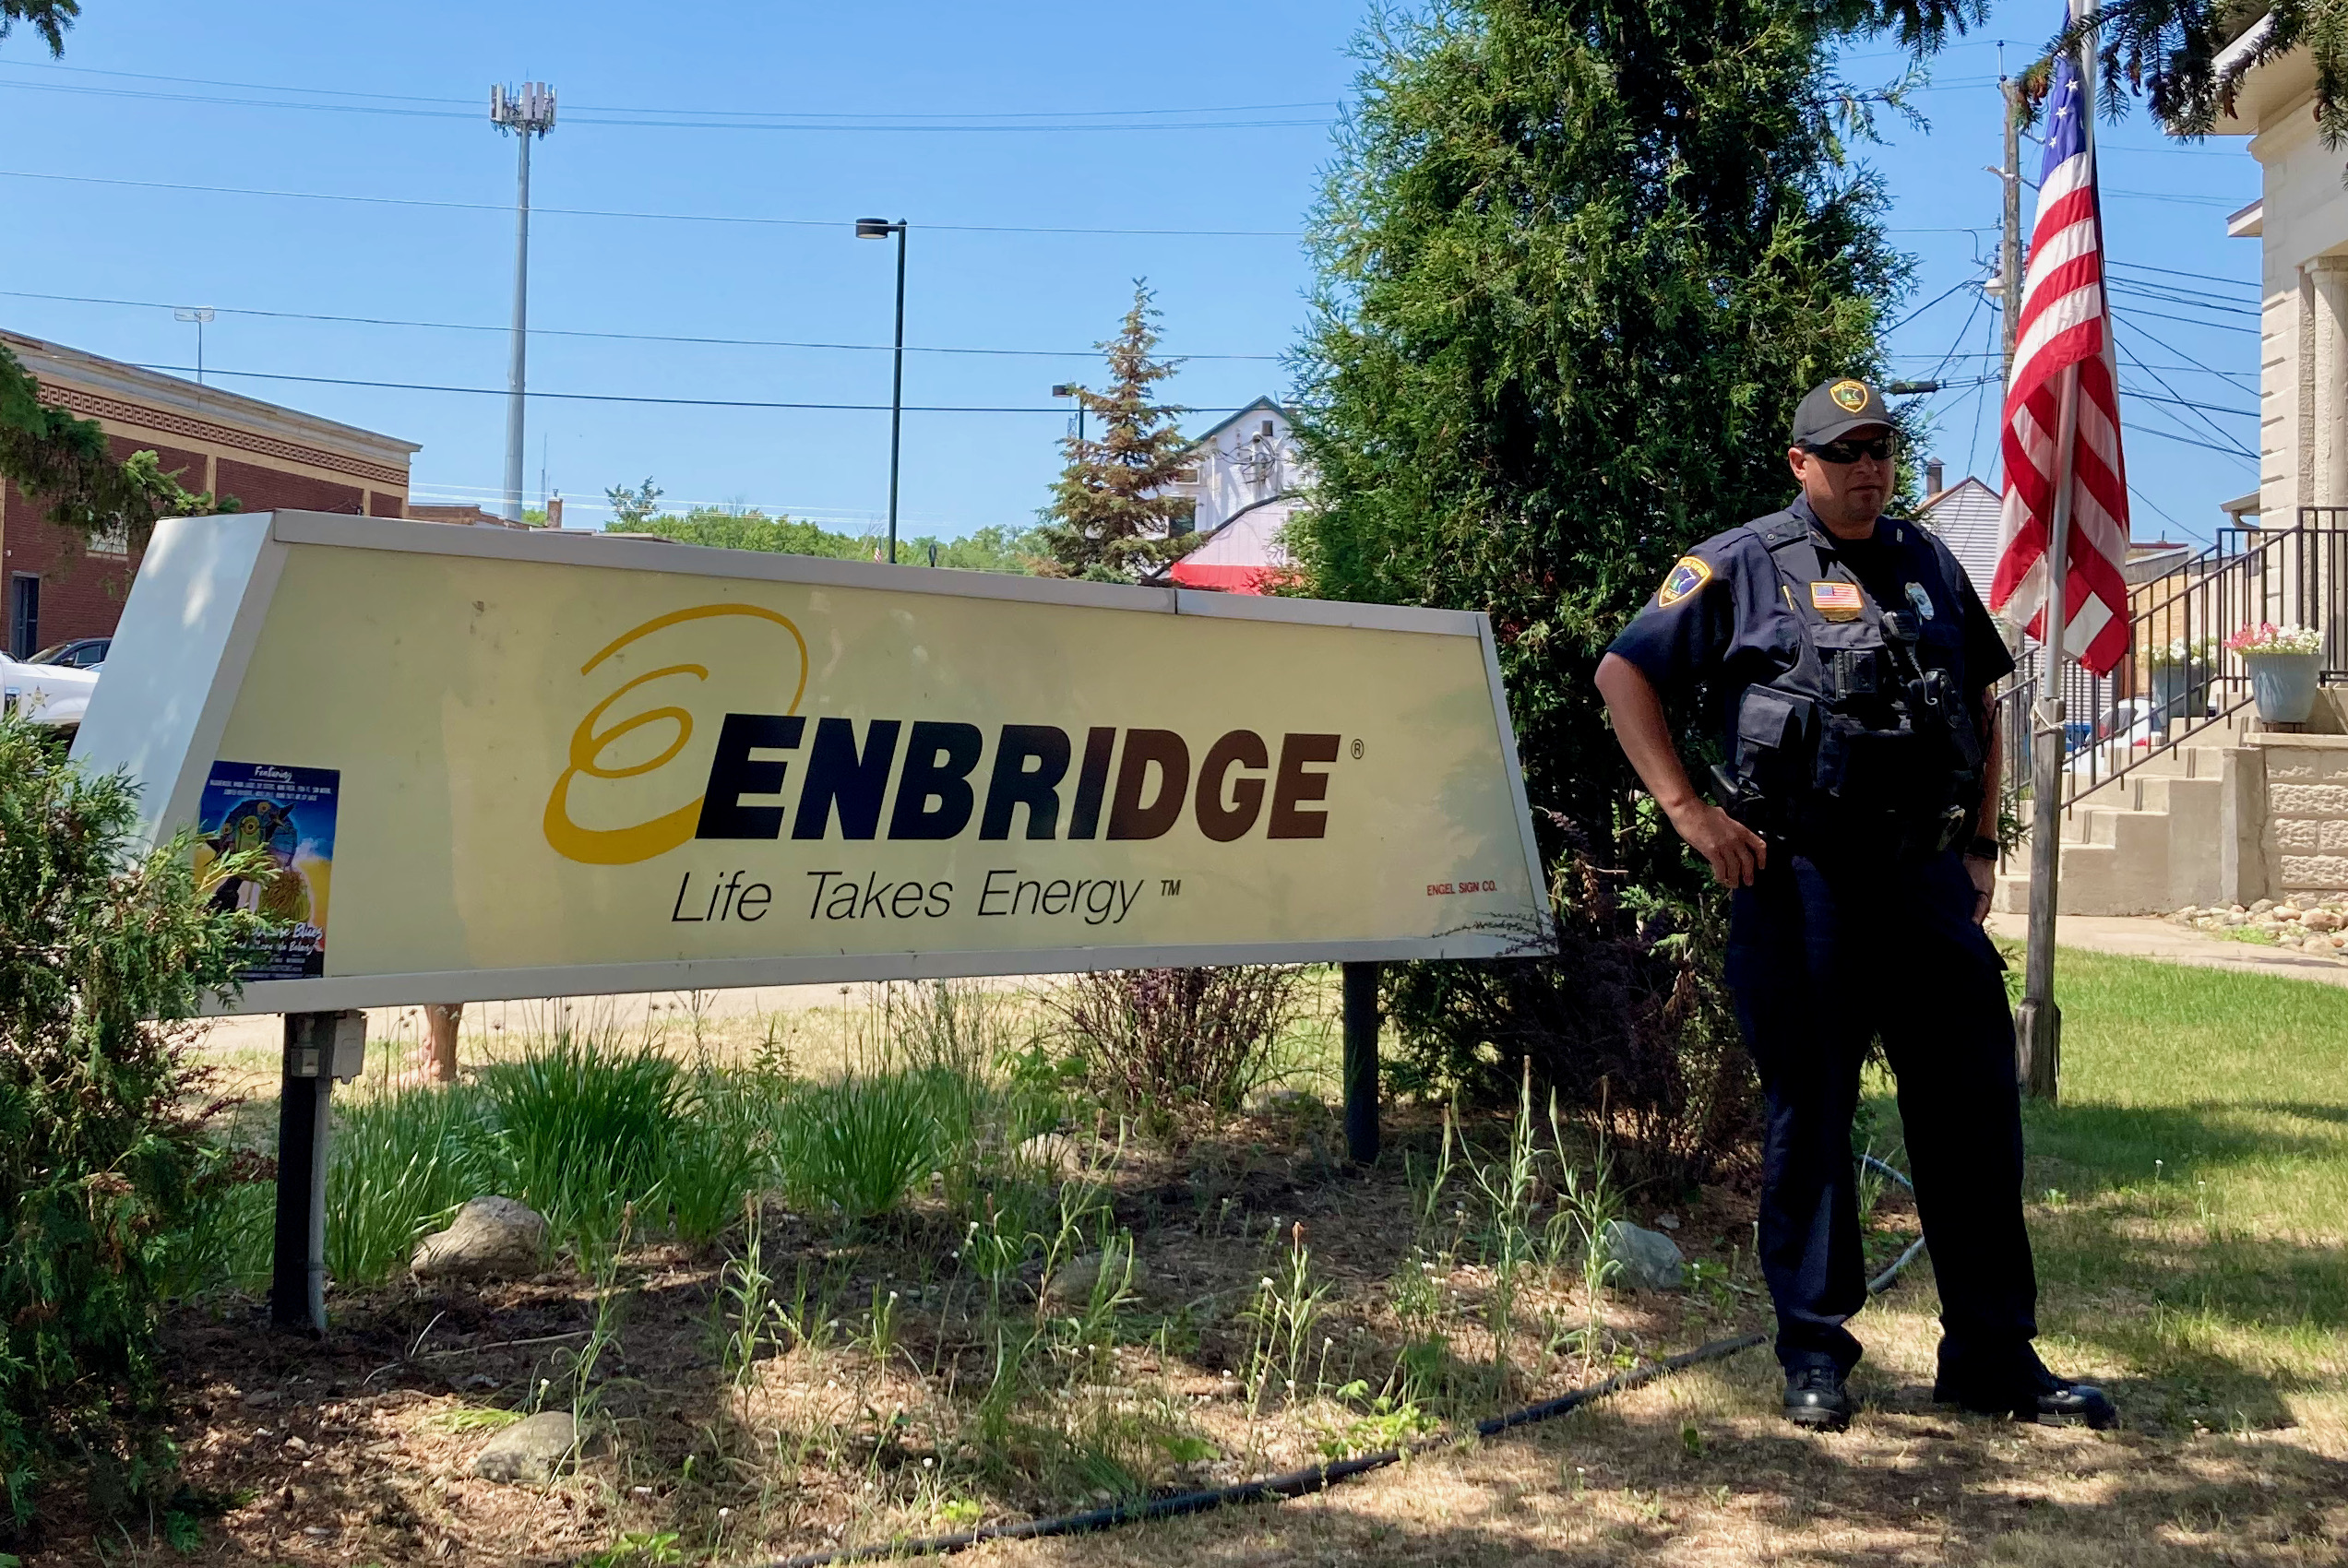 Park Rapids police guarding Enbridge property. Water protectors were ordered off the property.